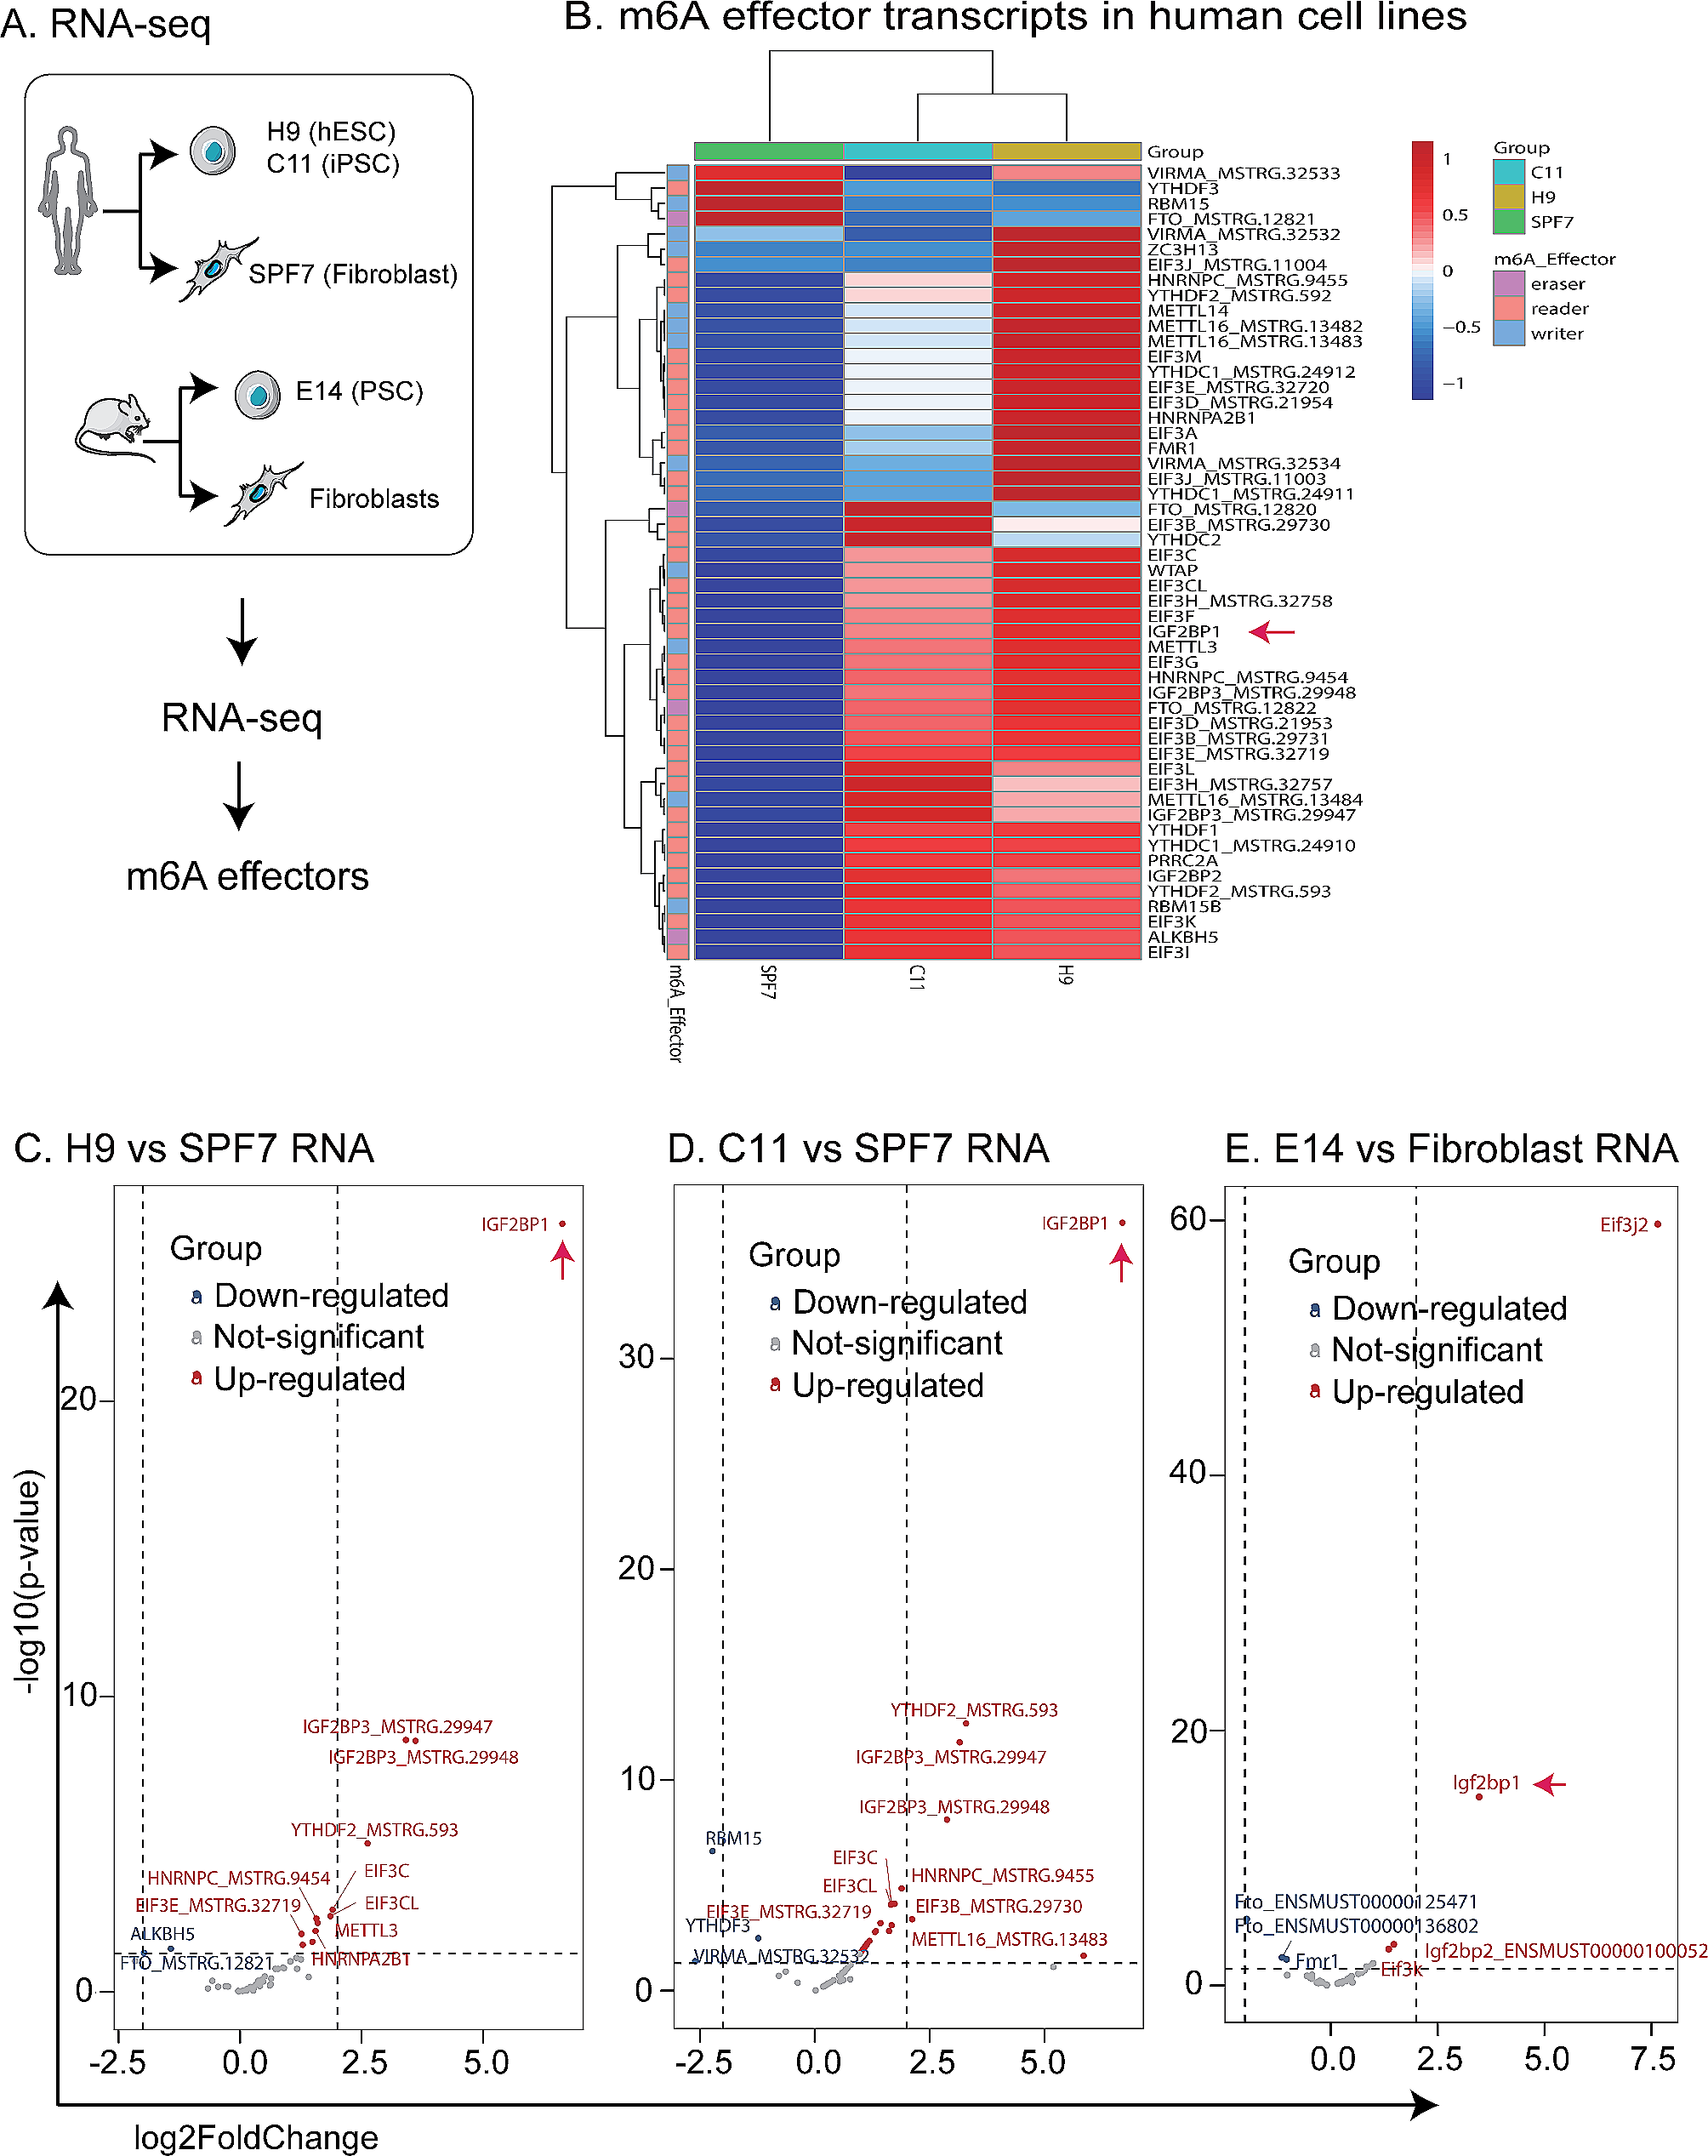 Profiling the role of m6A effectors in the regulation of pluripotent reprogramming